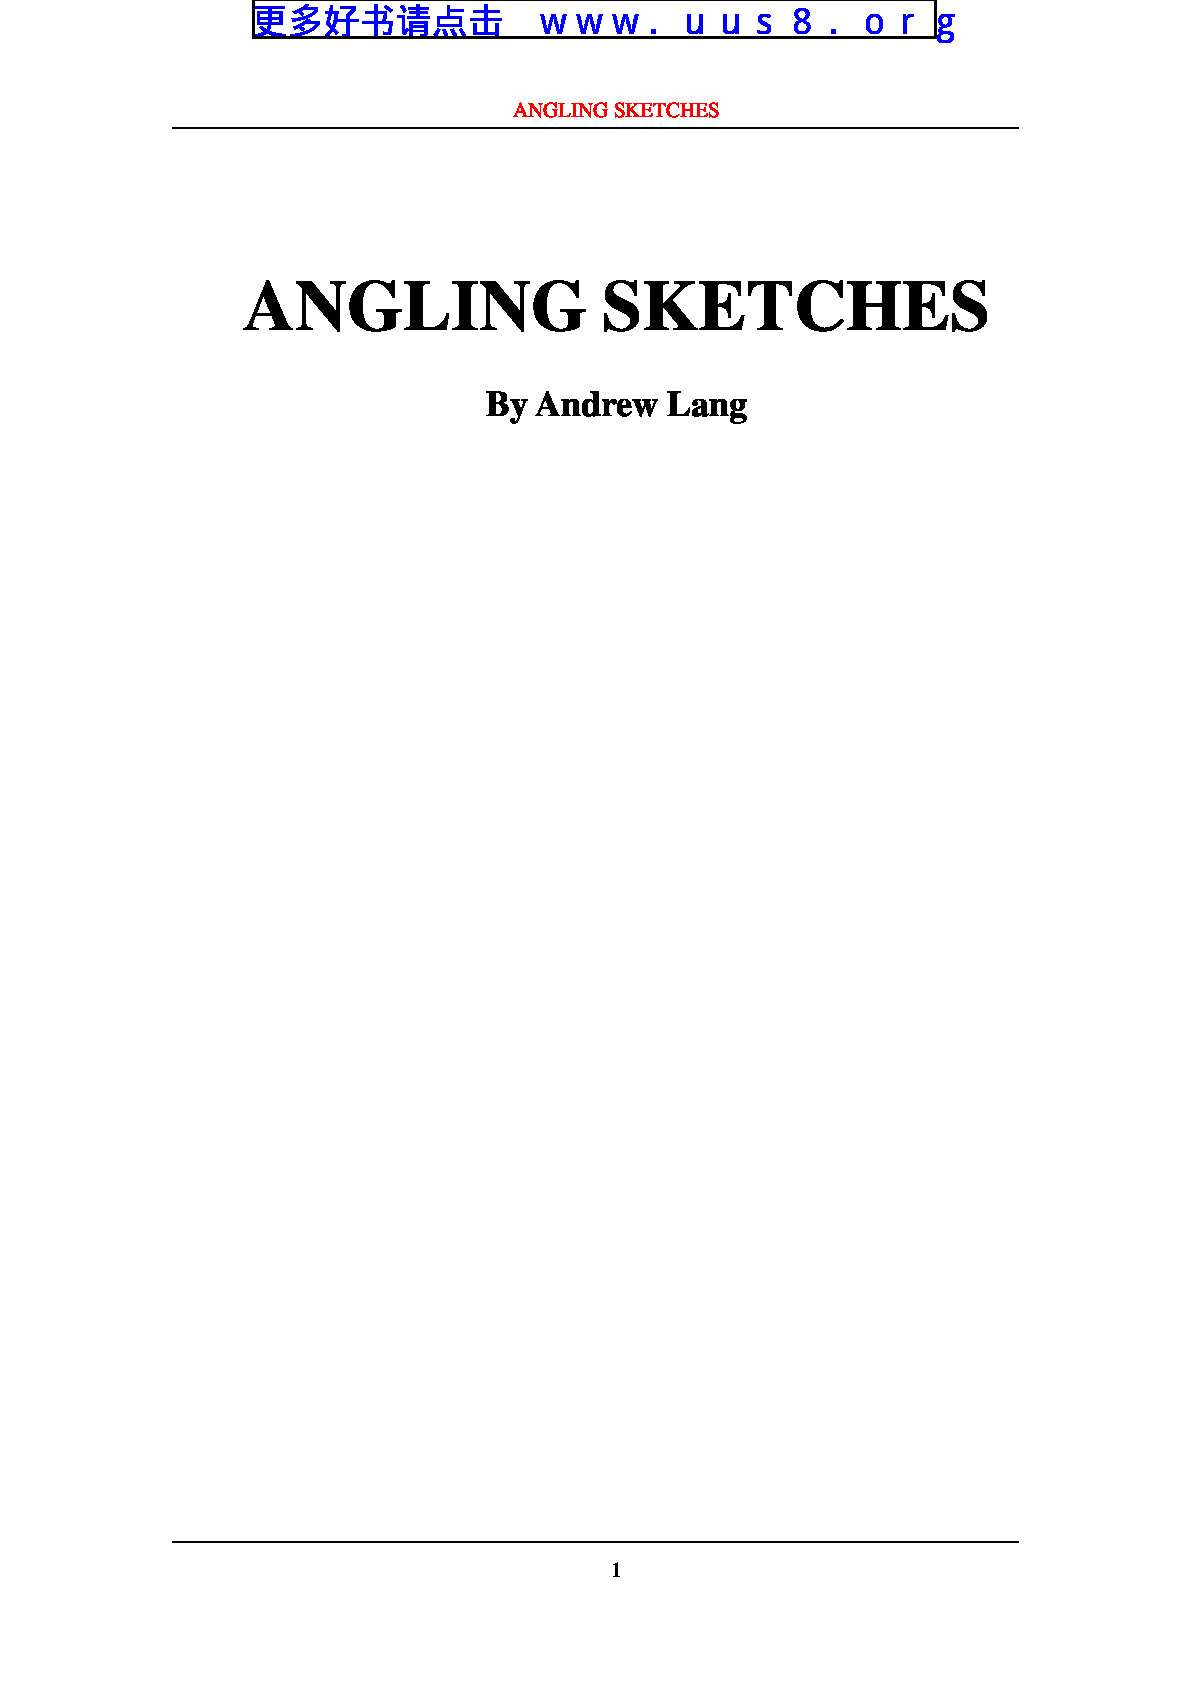 ANGLING_SKETCHES(安格林素描)